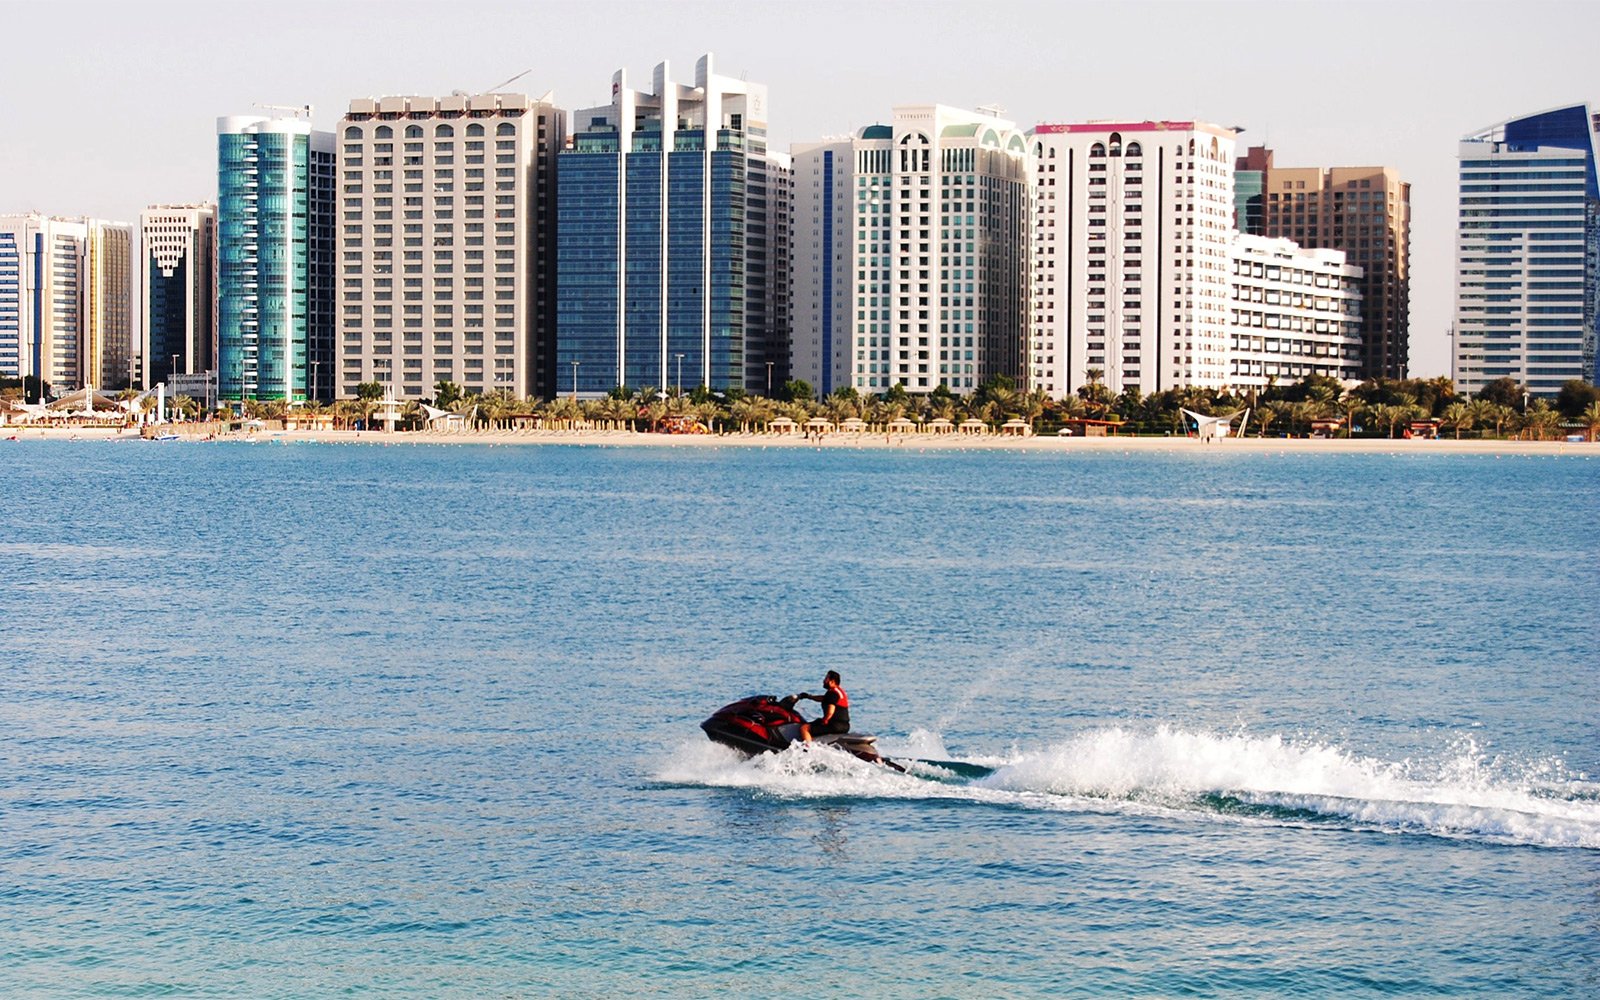 How to jump over the waves on a jet ski in Abu Dhabi